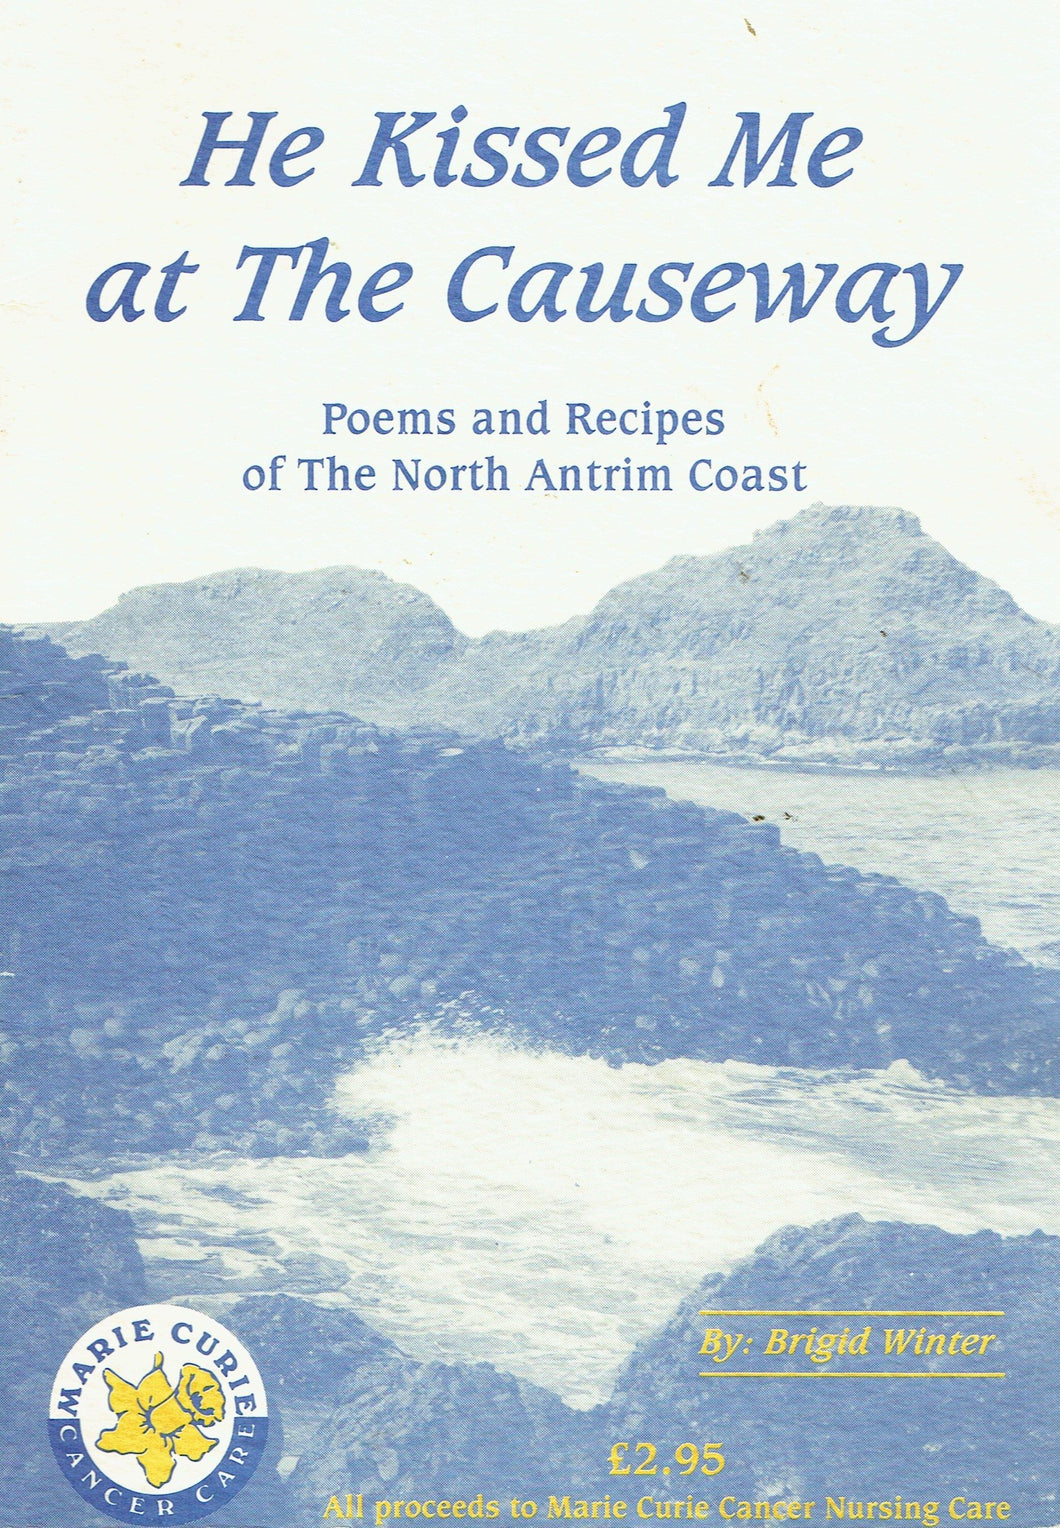 He Kissed Me At The Causeway: Poems and Recipes of the North Antrim Coast